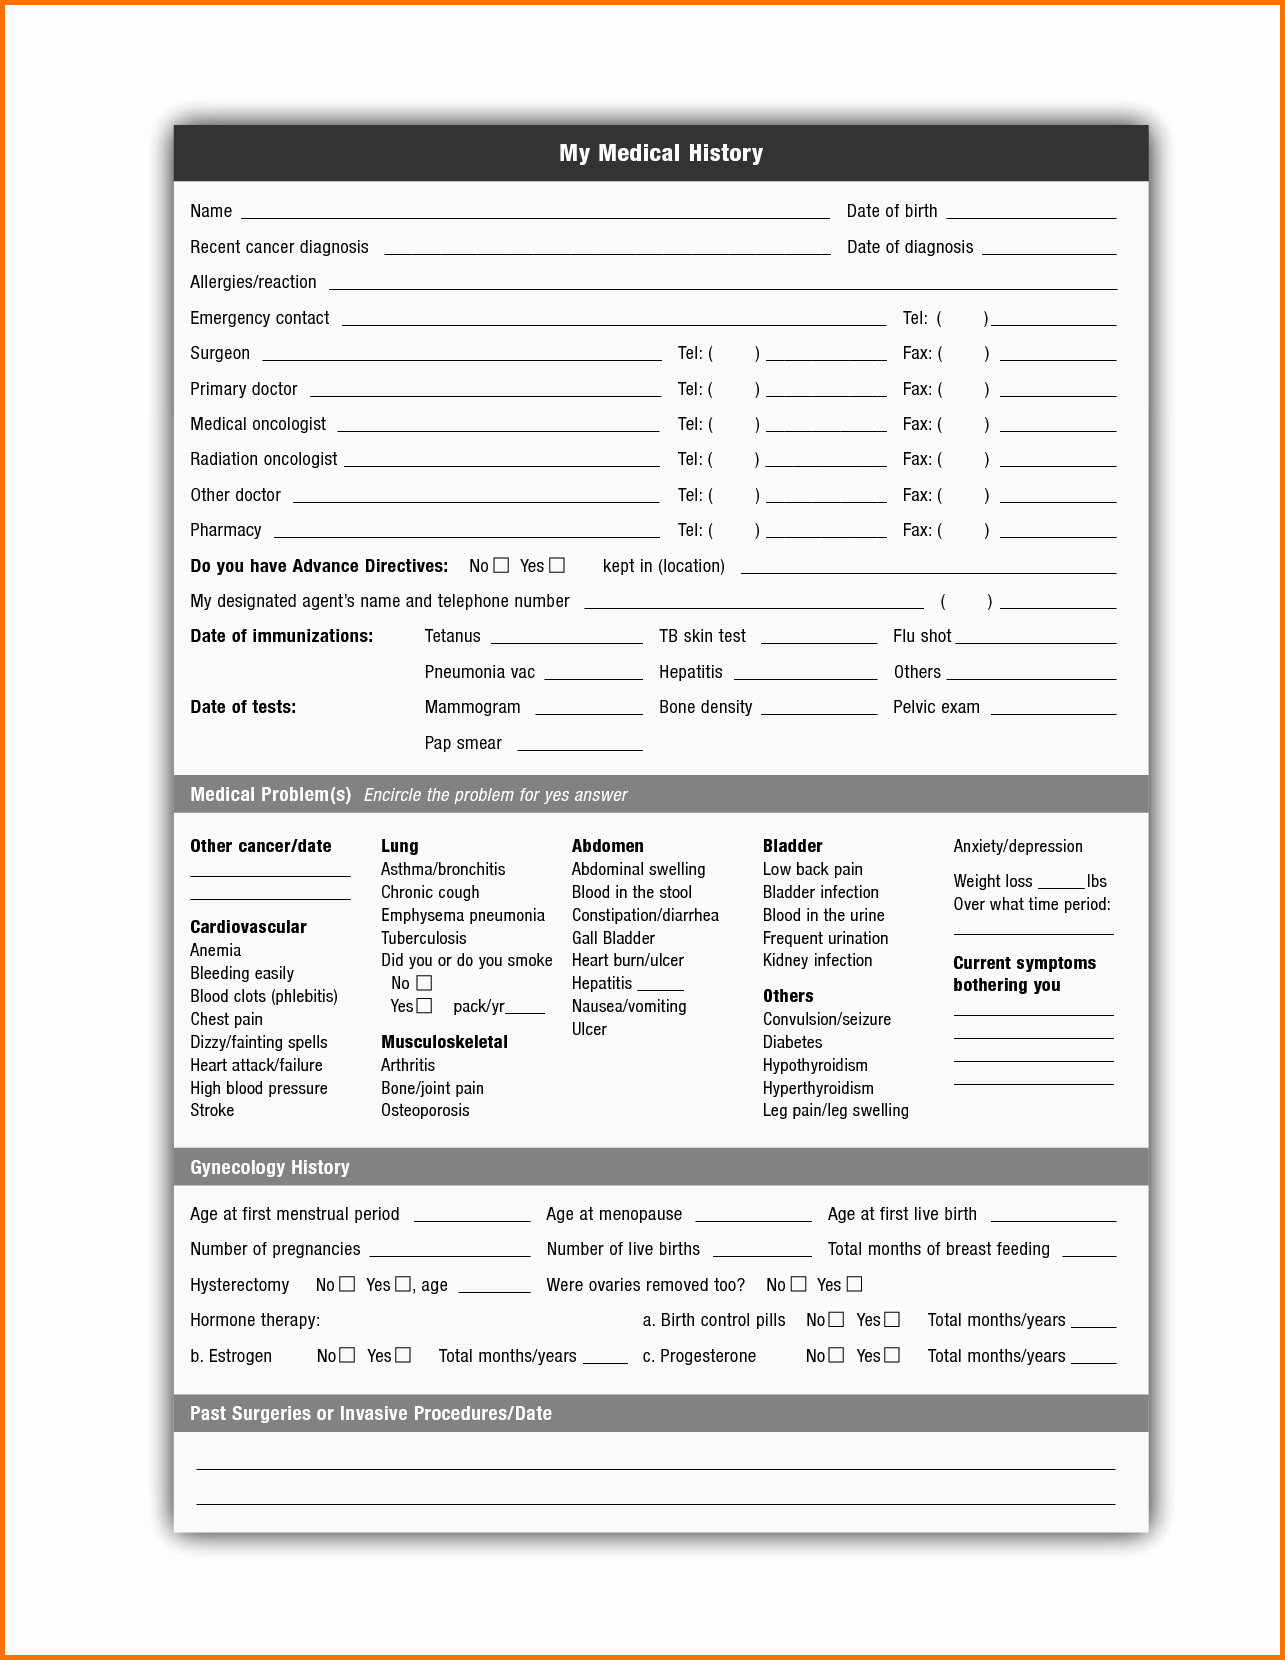 Personal History Printable Medical Form | Www.topsimages - Free Printable Personal Medical History Forms